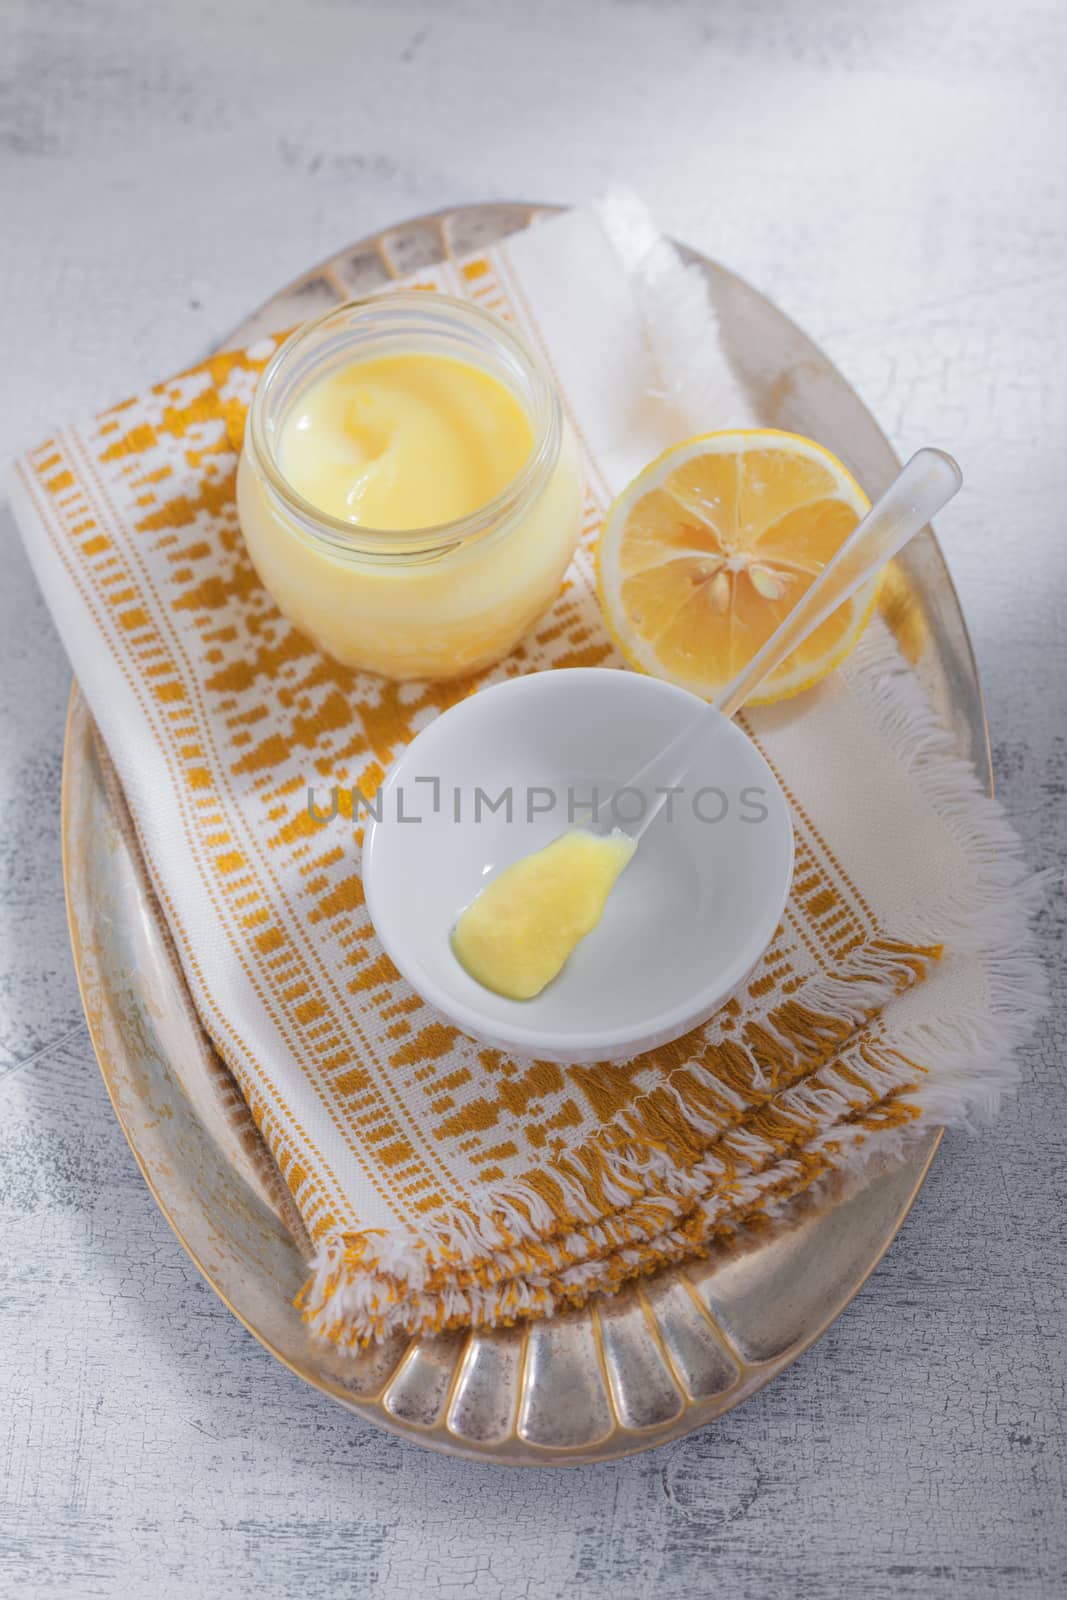 Lemon kurd with a spoon served on a table by supercat67